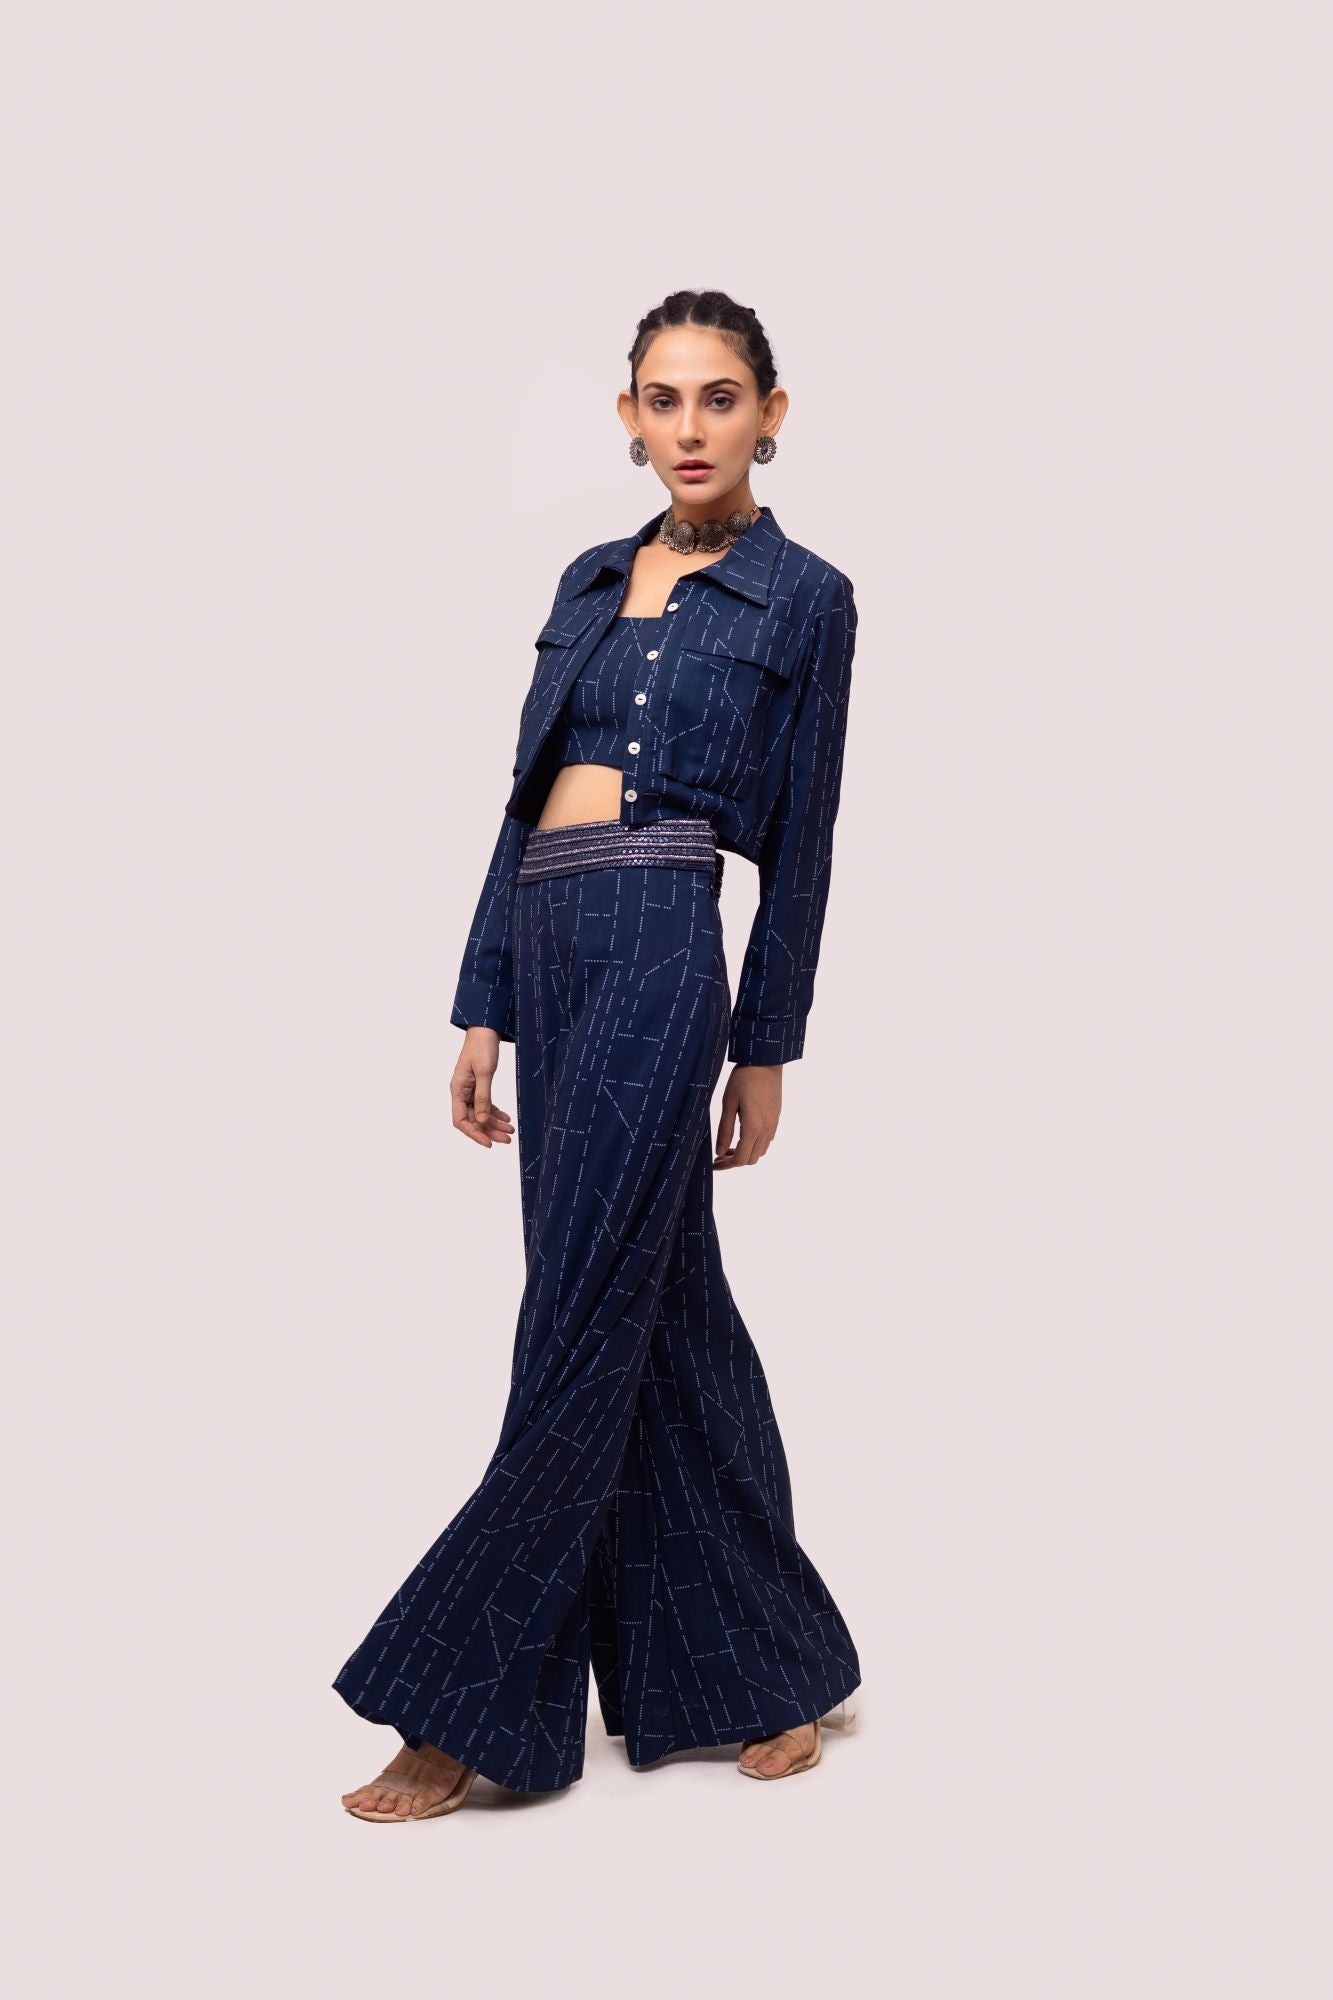 Shop navy blue embellished printed Kota print co-ord set online in USA. Shop the best and latest designs in embroidered sarees, designer sarees, Anarkali suit, lehengas, sharara suits for weddings and special occasions from Pure Elegance Indian fashion store in USA.-side